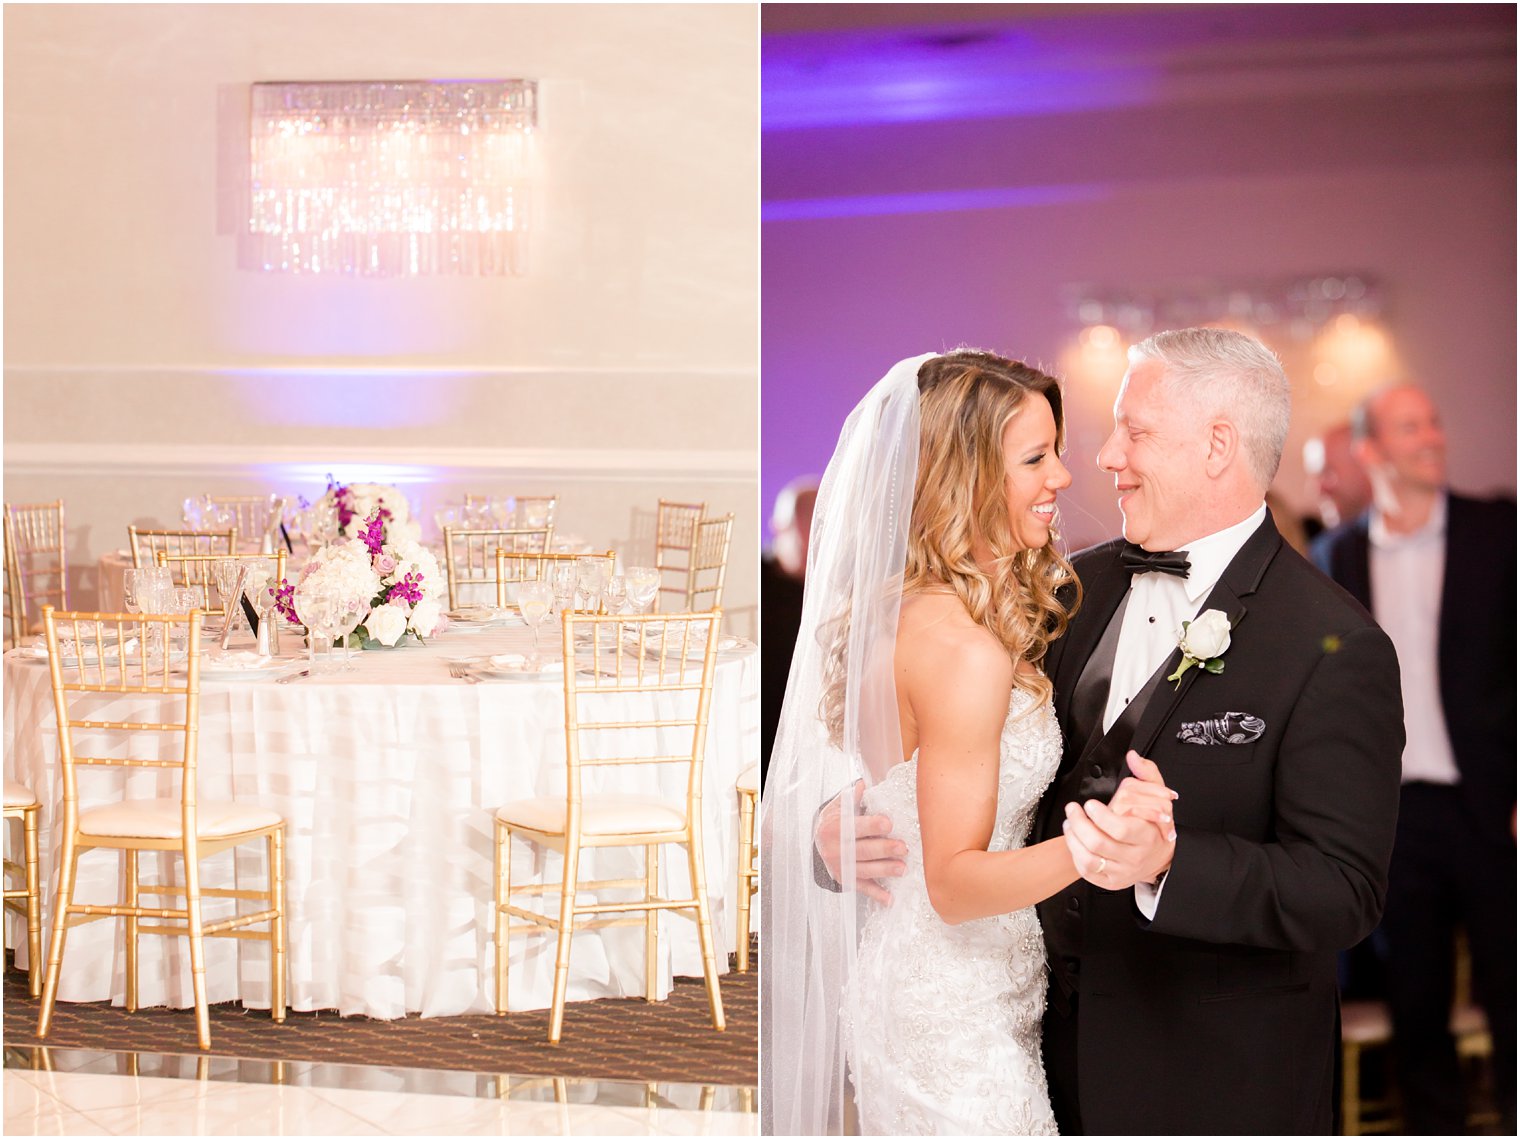 Father and bride dance | Photos by Idalia Photography